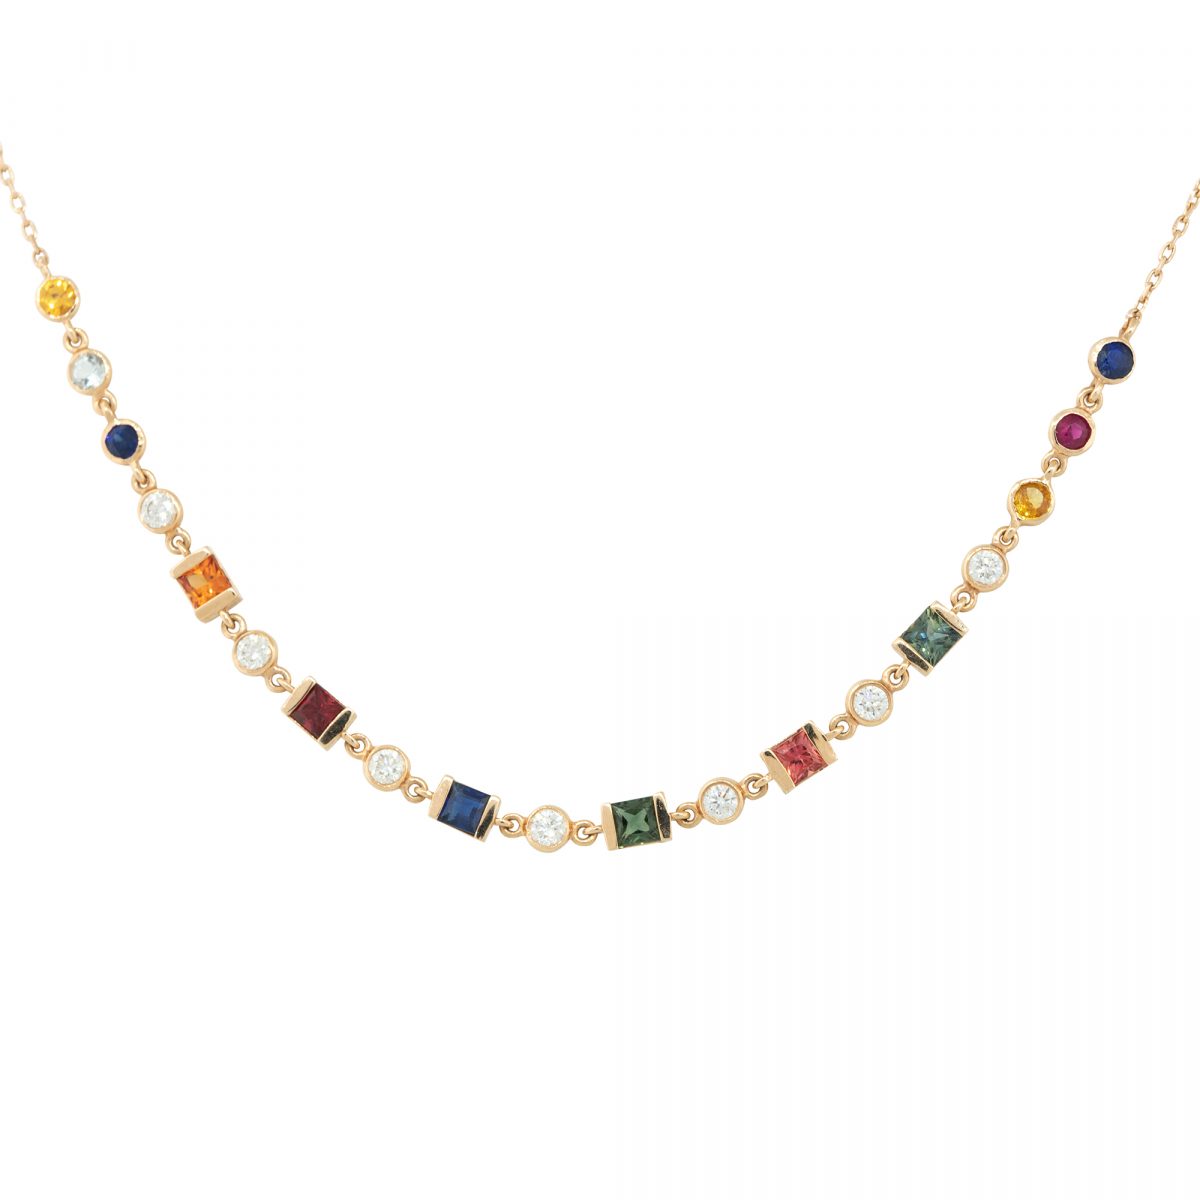 14k Rose Gold 0.36ctw Diamond and Multi-Colored Stone Station Necklace